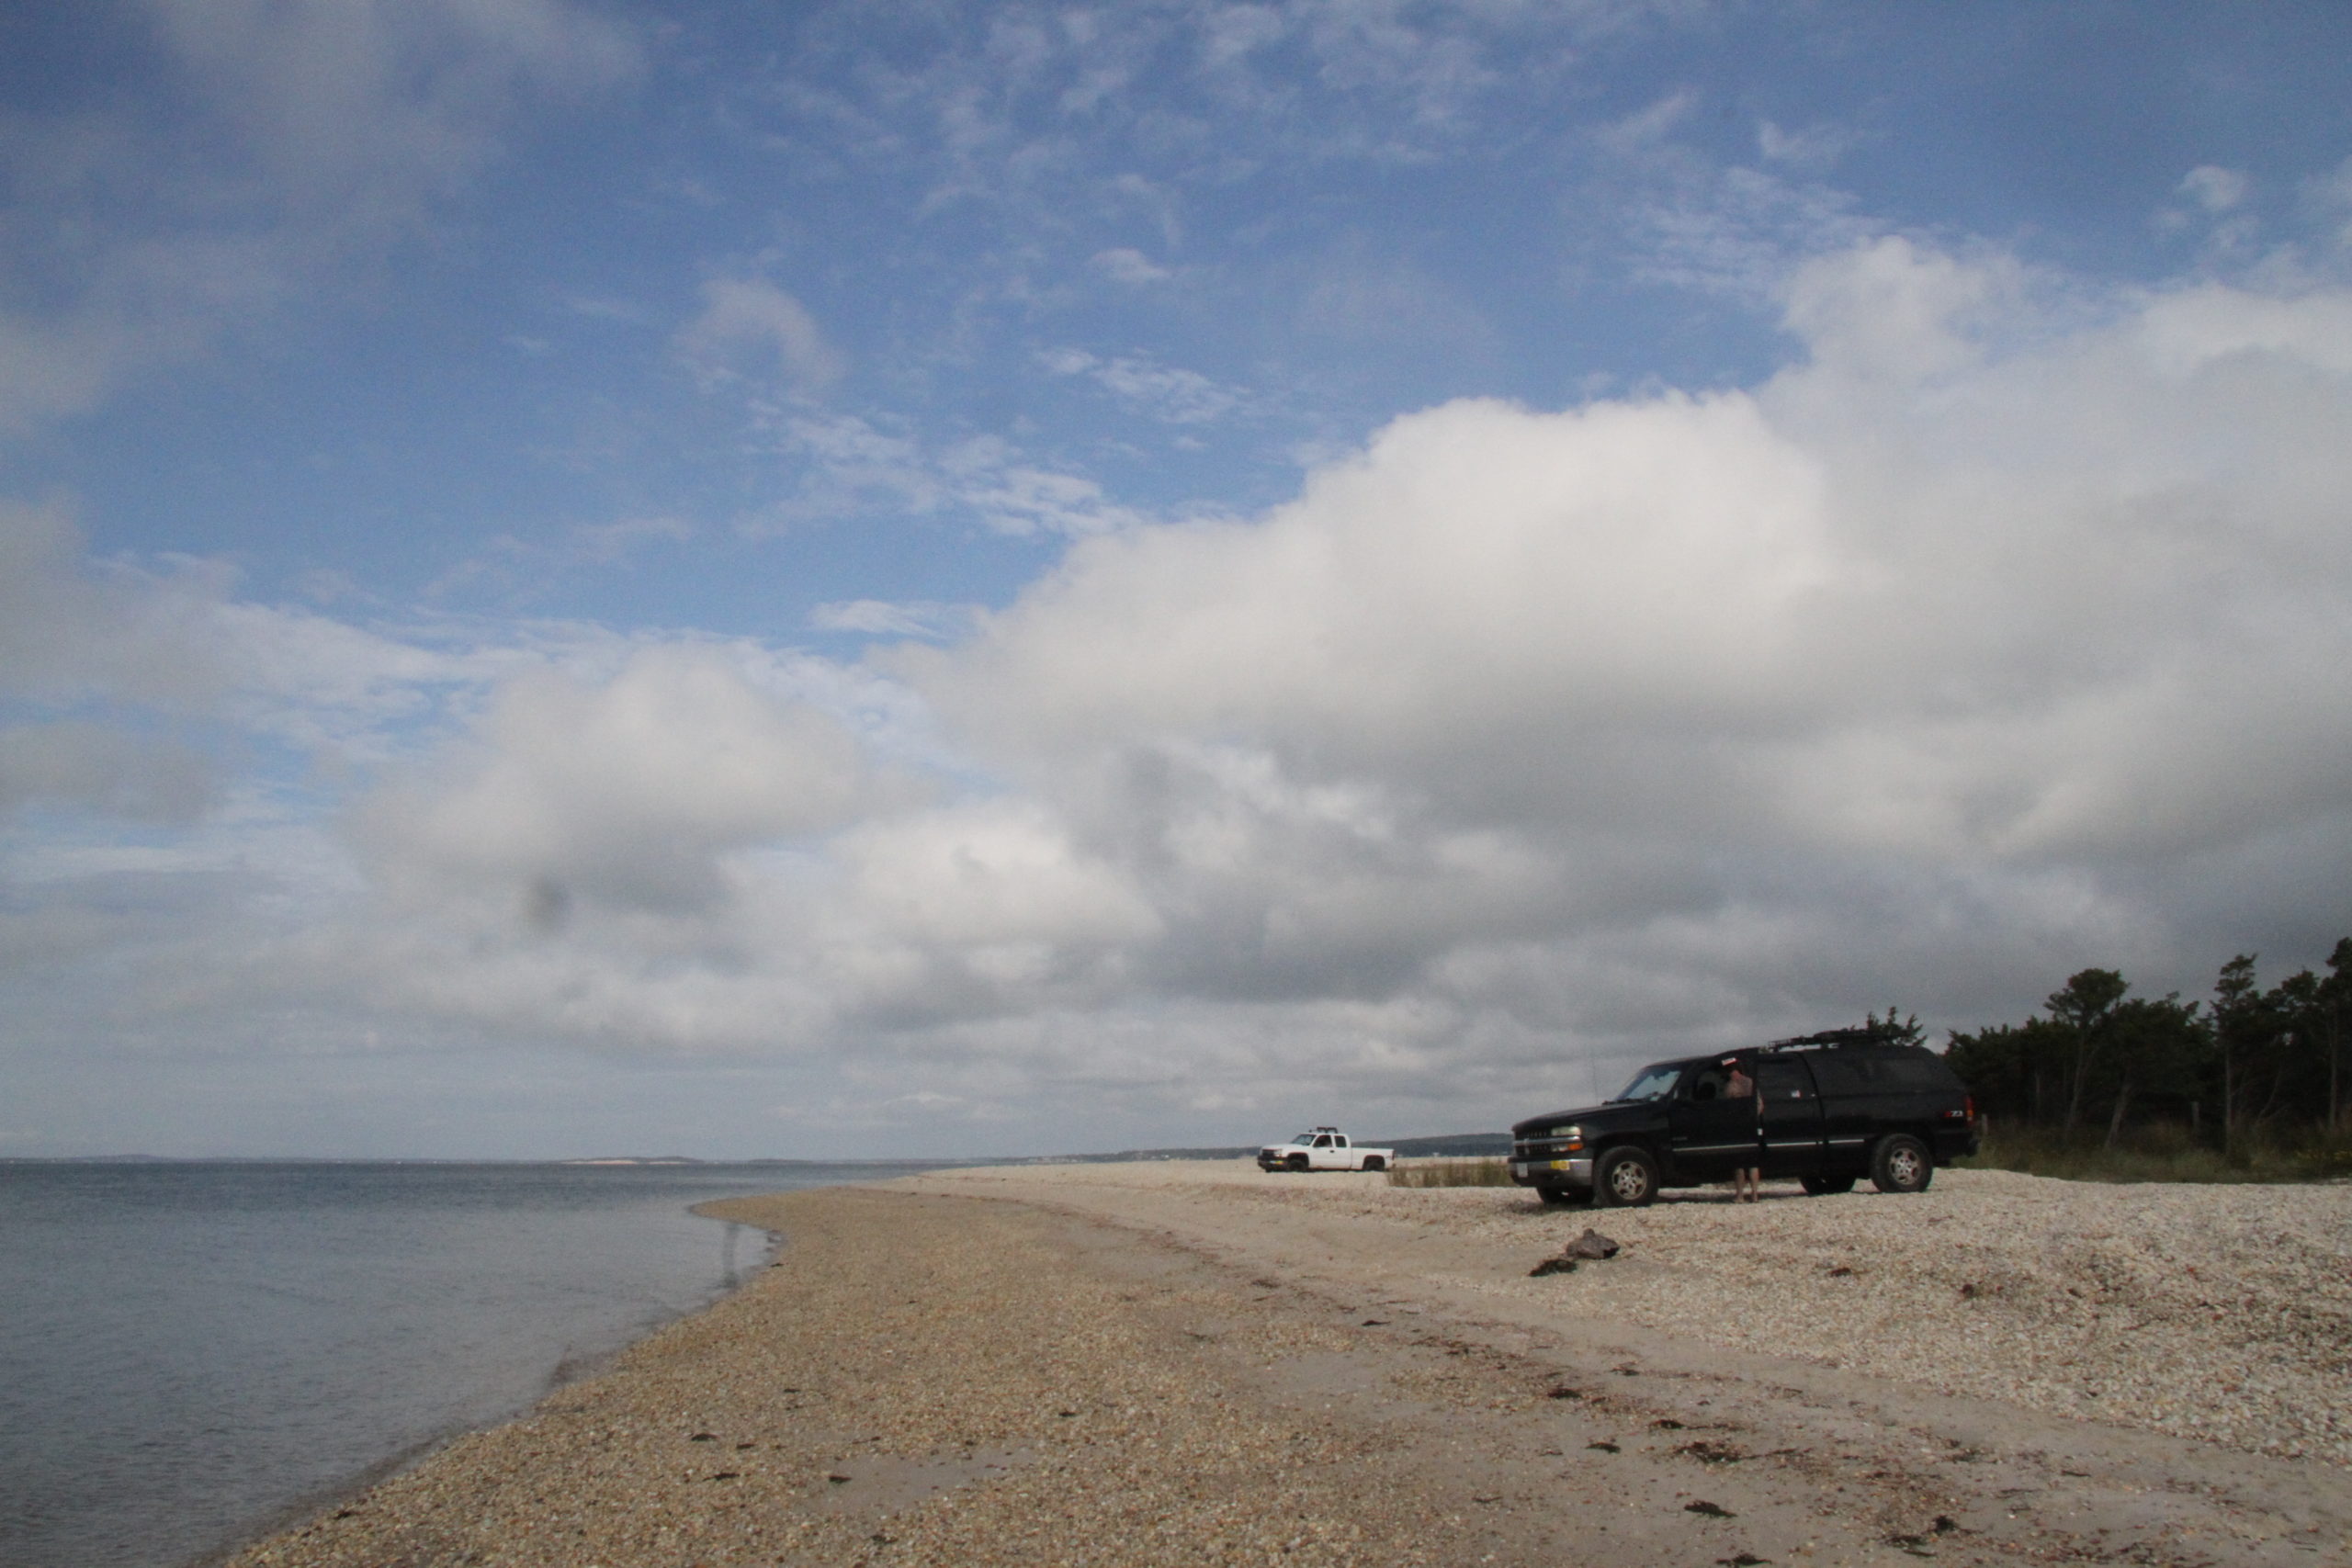 The owner of the 500-acre Cow Neck Preserve has asked the Southampton Town Conservation Board for permission to place boulders across North Sea Beach to prevent 4x4 vehicle access to the western post portions of the beach. 